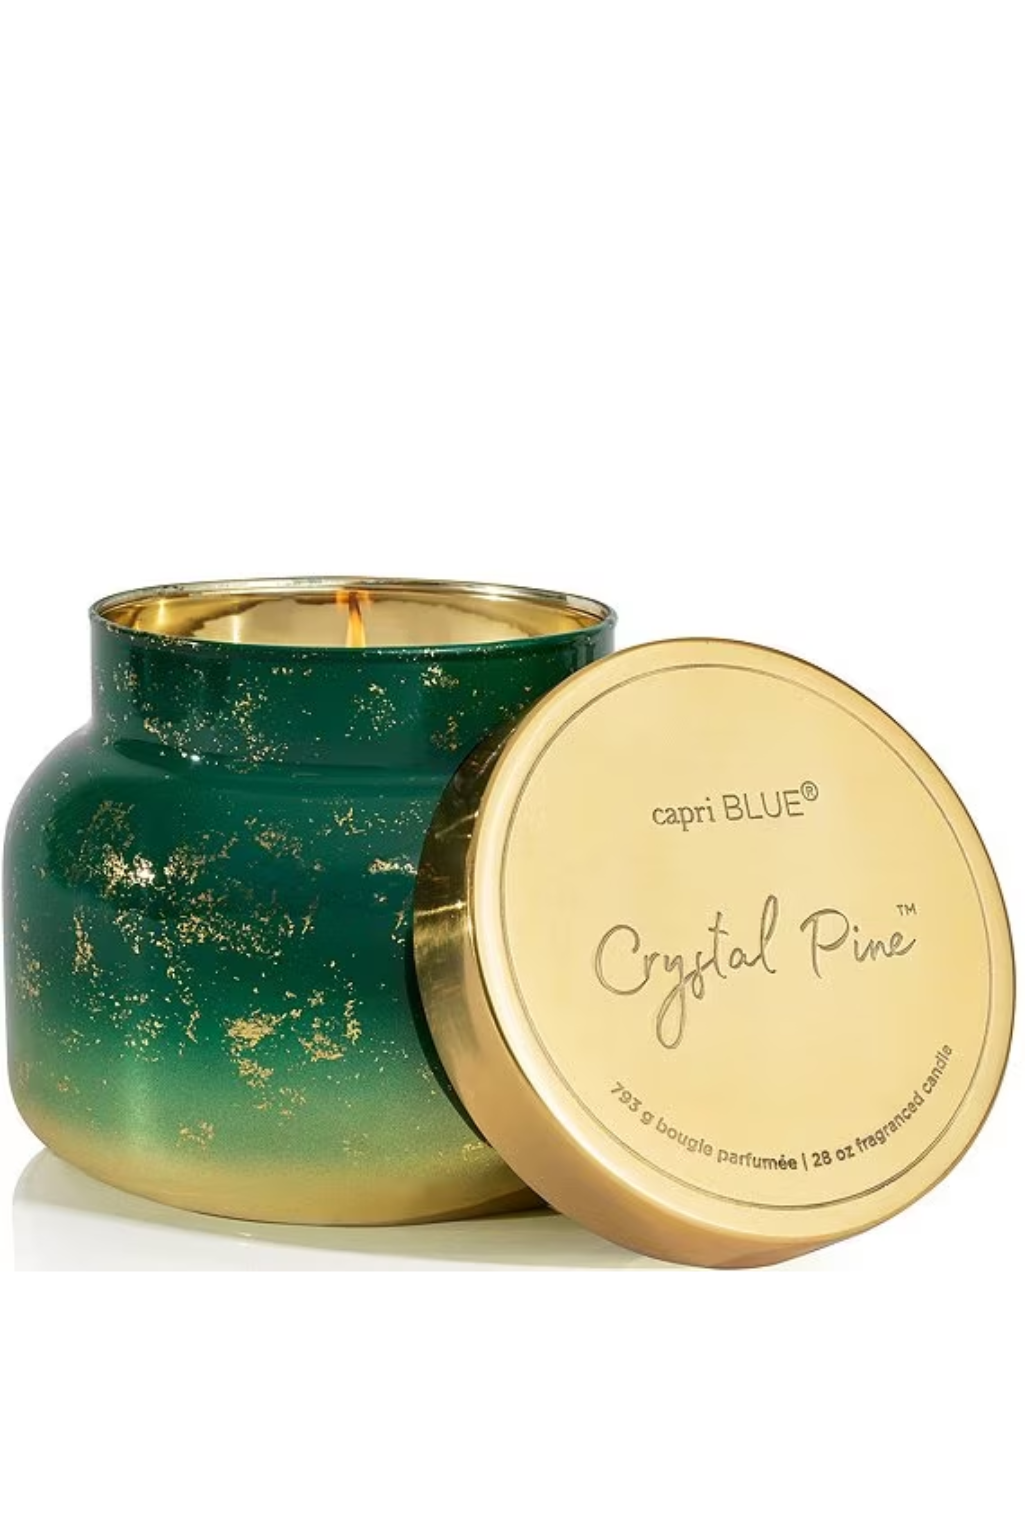 Crystal Pine Glimmer Candle - 19oz